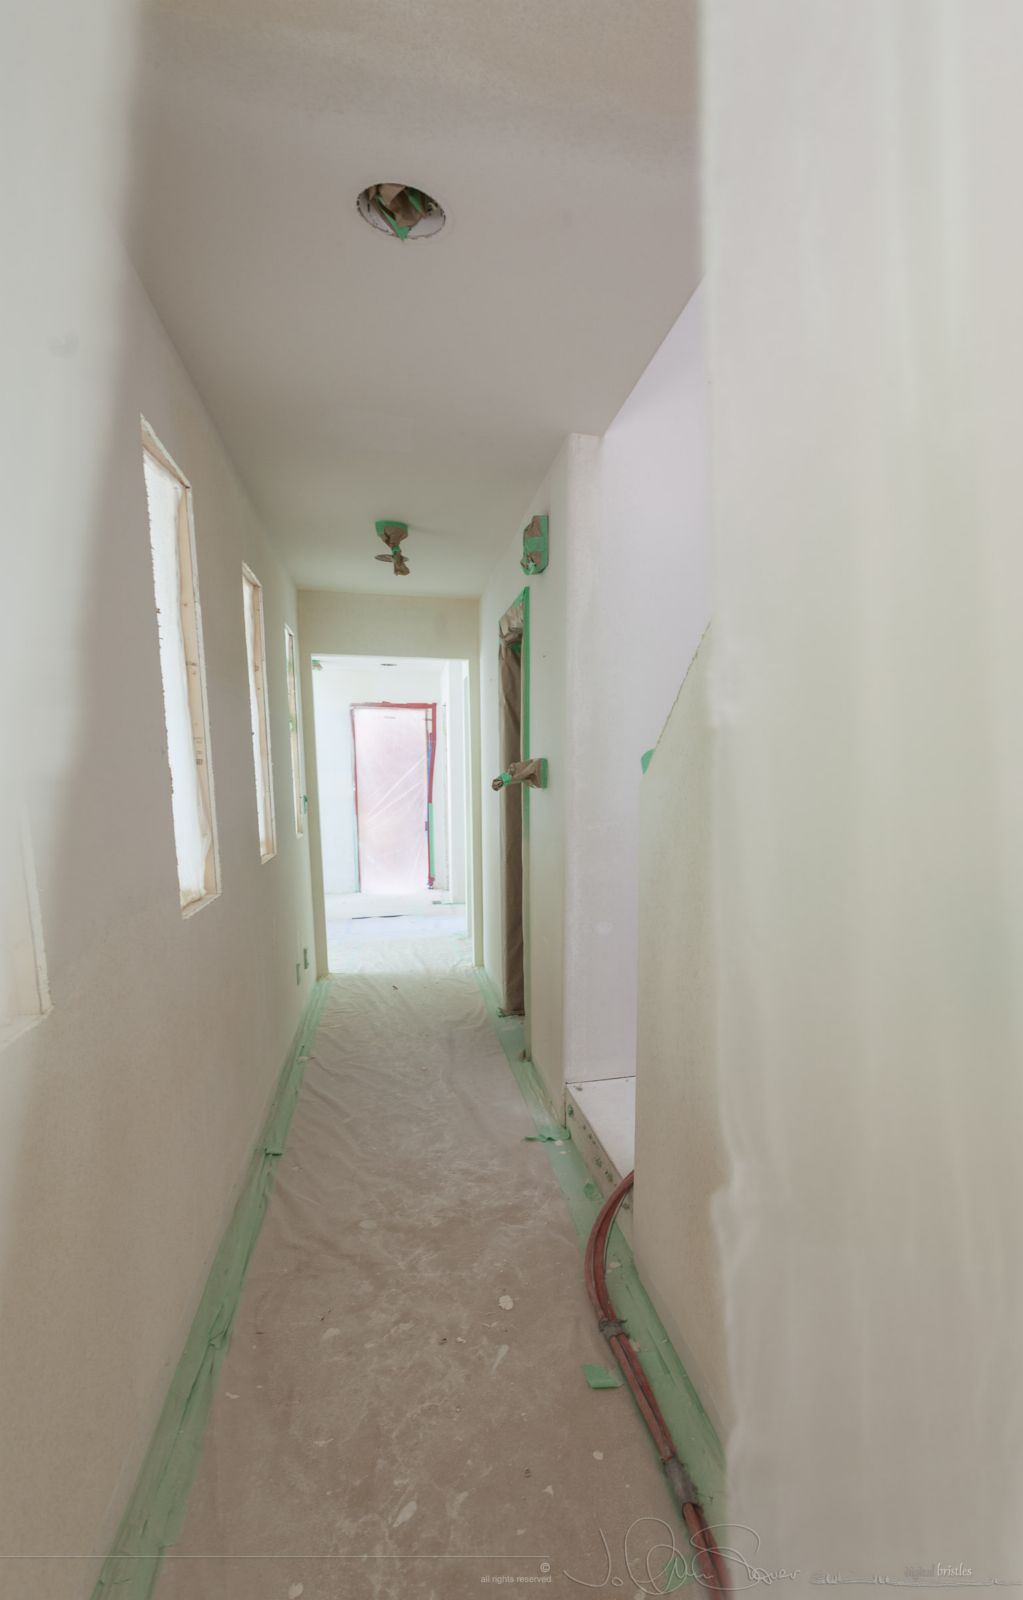 Drywall texturing - everthing's covered in plastic. June 16th